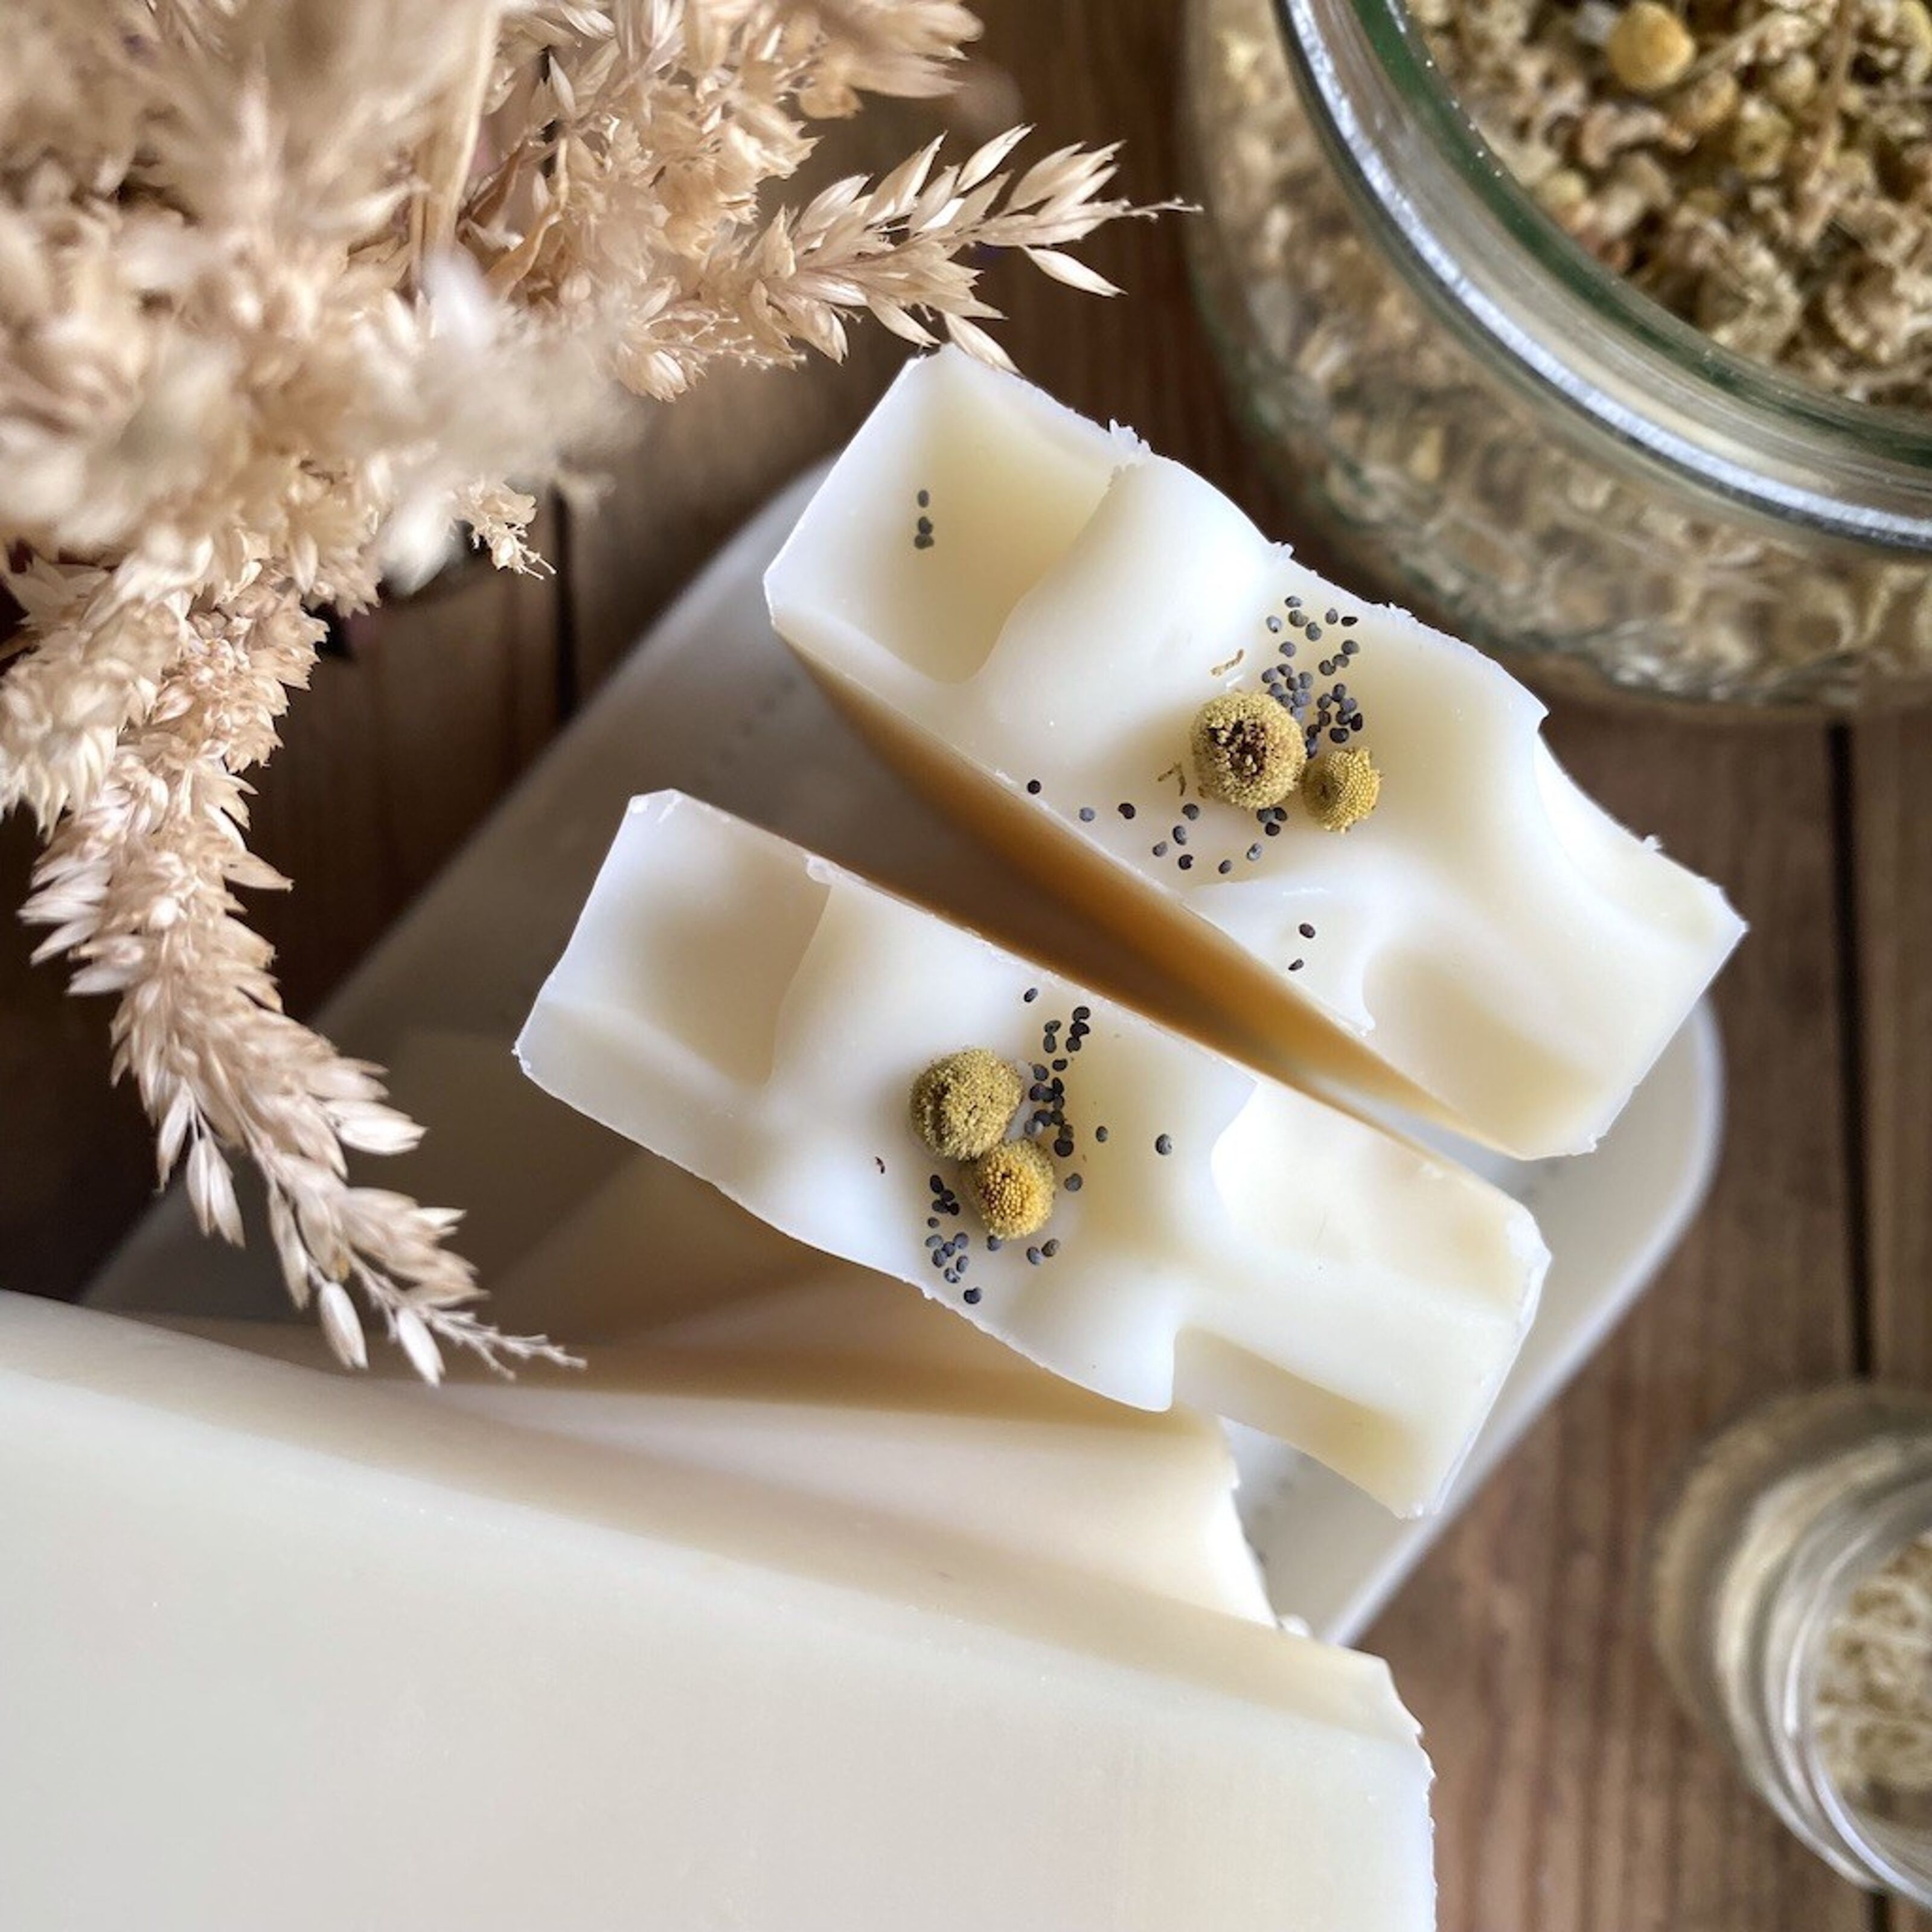 Premium Photo  Natural handmade soap with chamomile flower extract. around  are dried flowers.